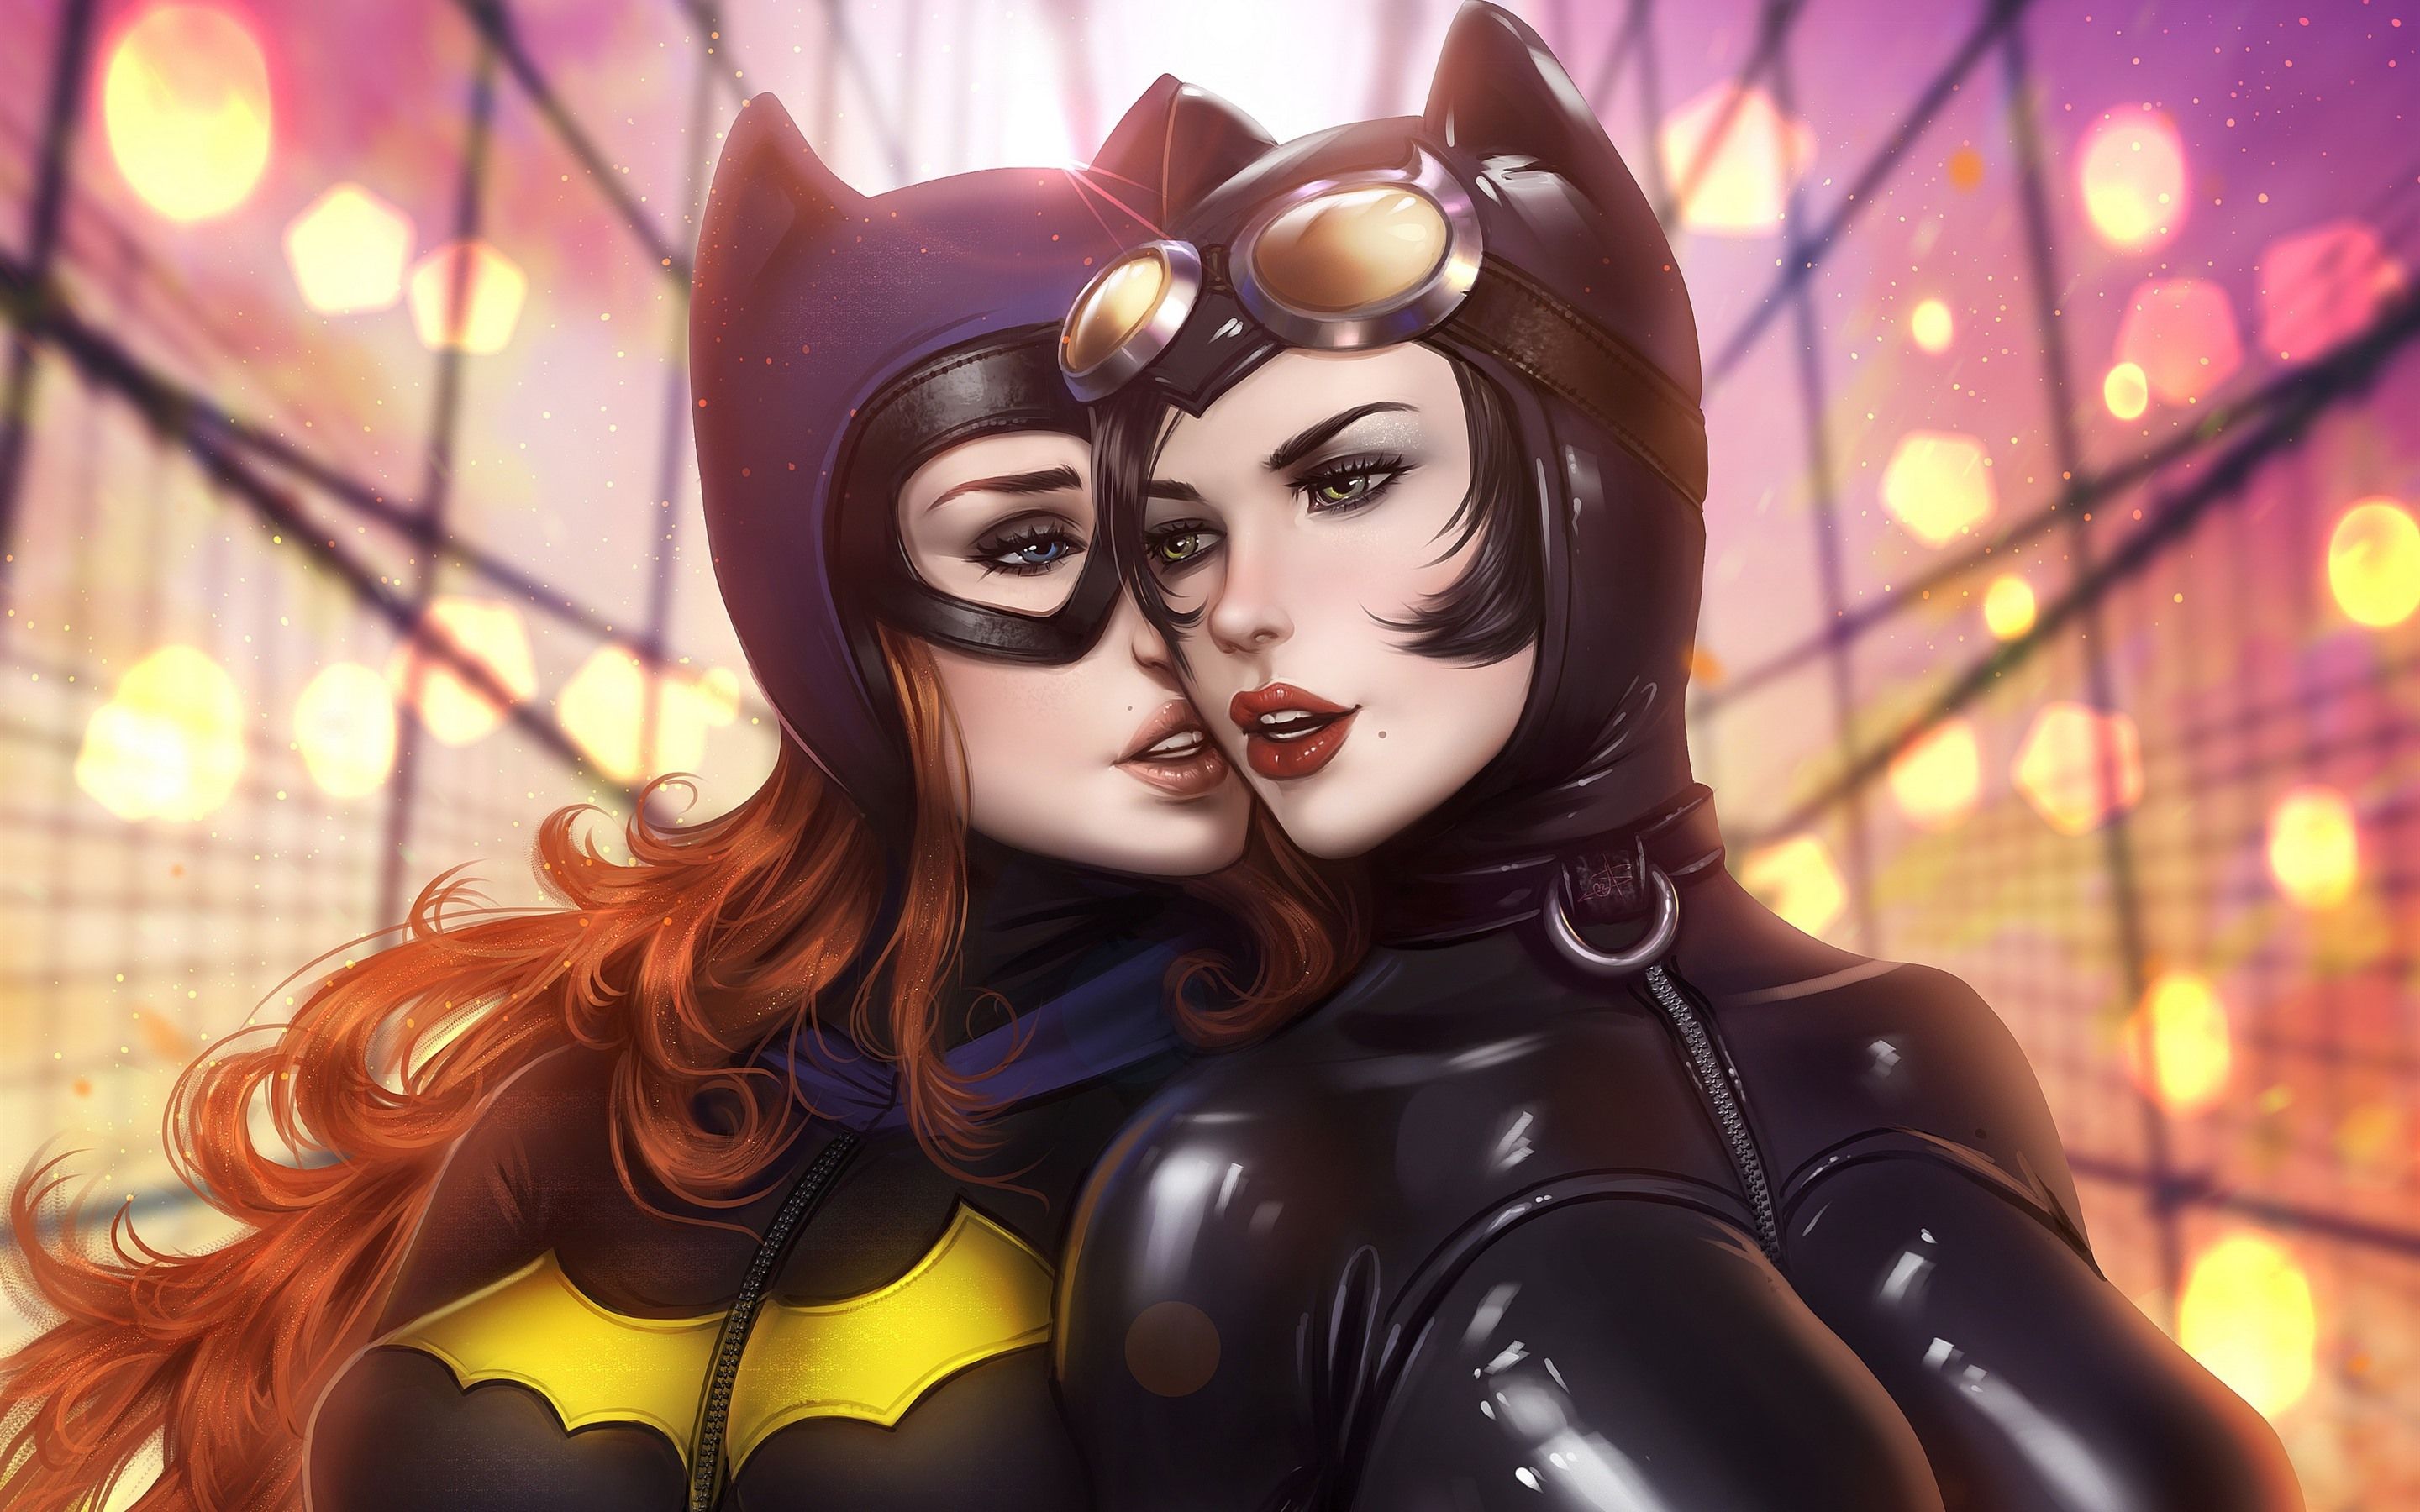 Wallpaper Catwoman, two girls, DC Comics, art picture 2880x1800 HD Picture, Image